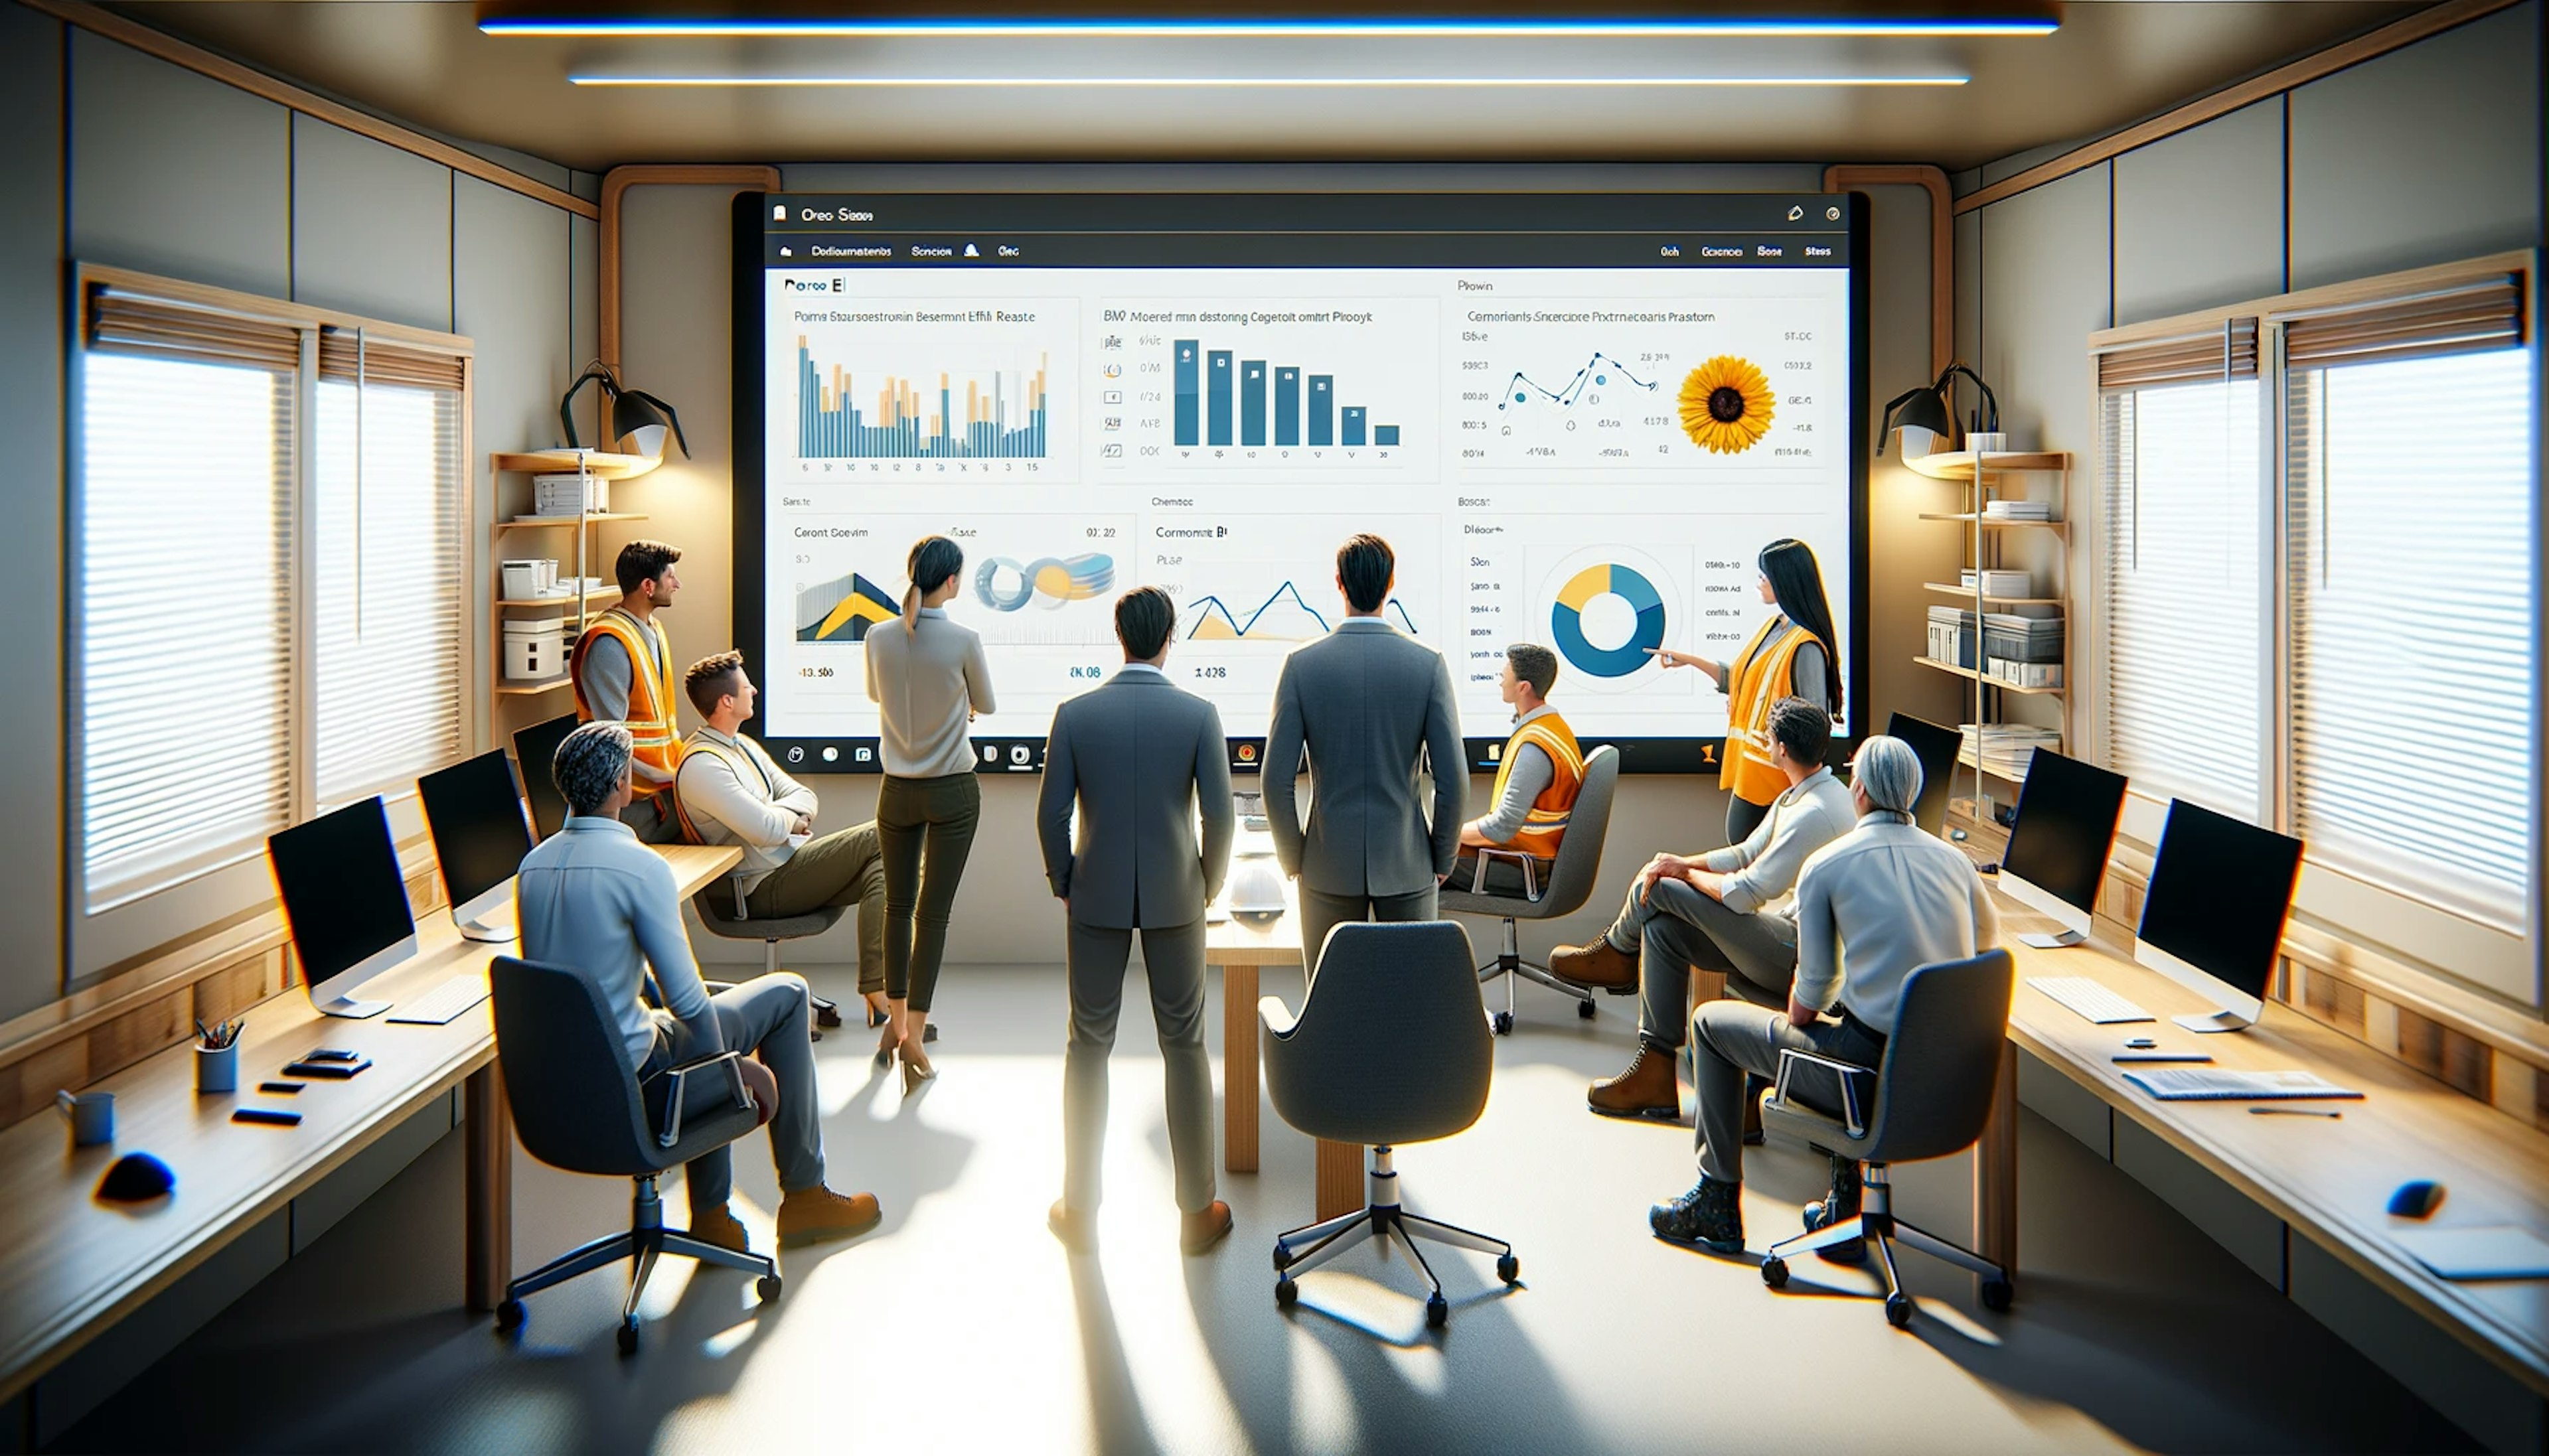 Construction team discussing insights from a Power BI dashboard